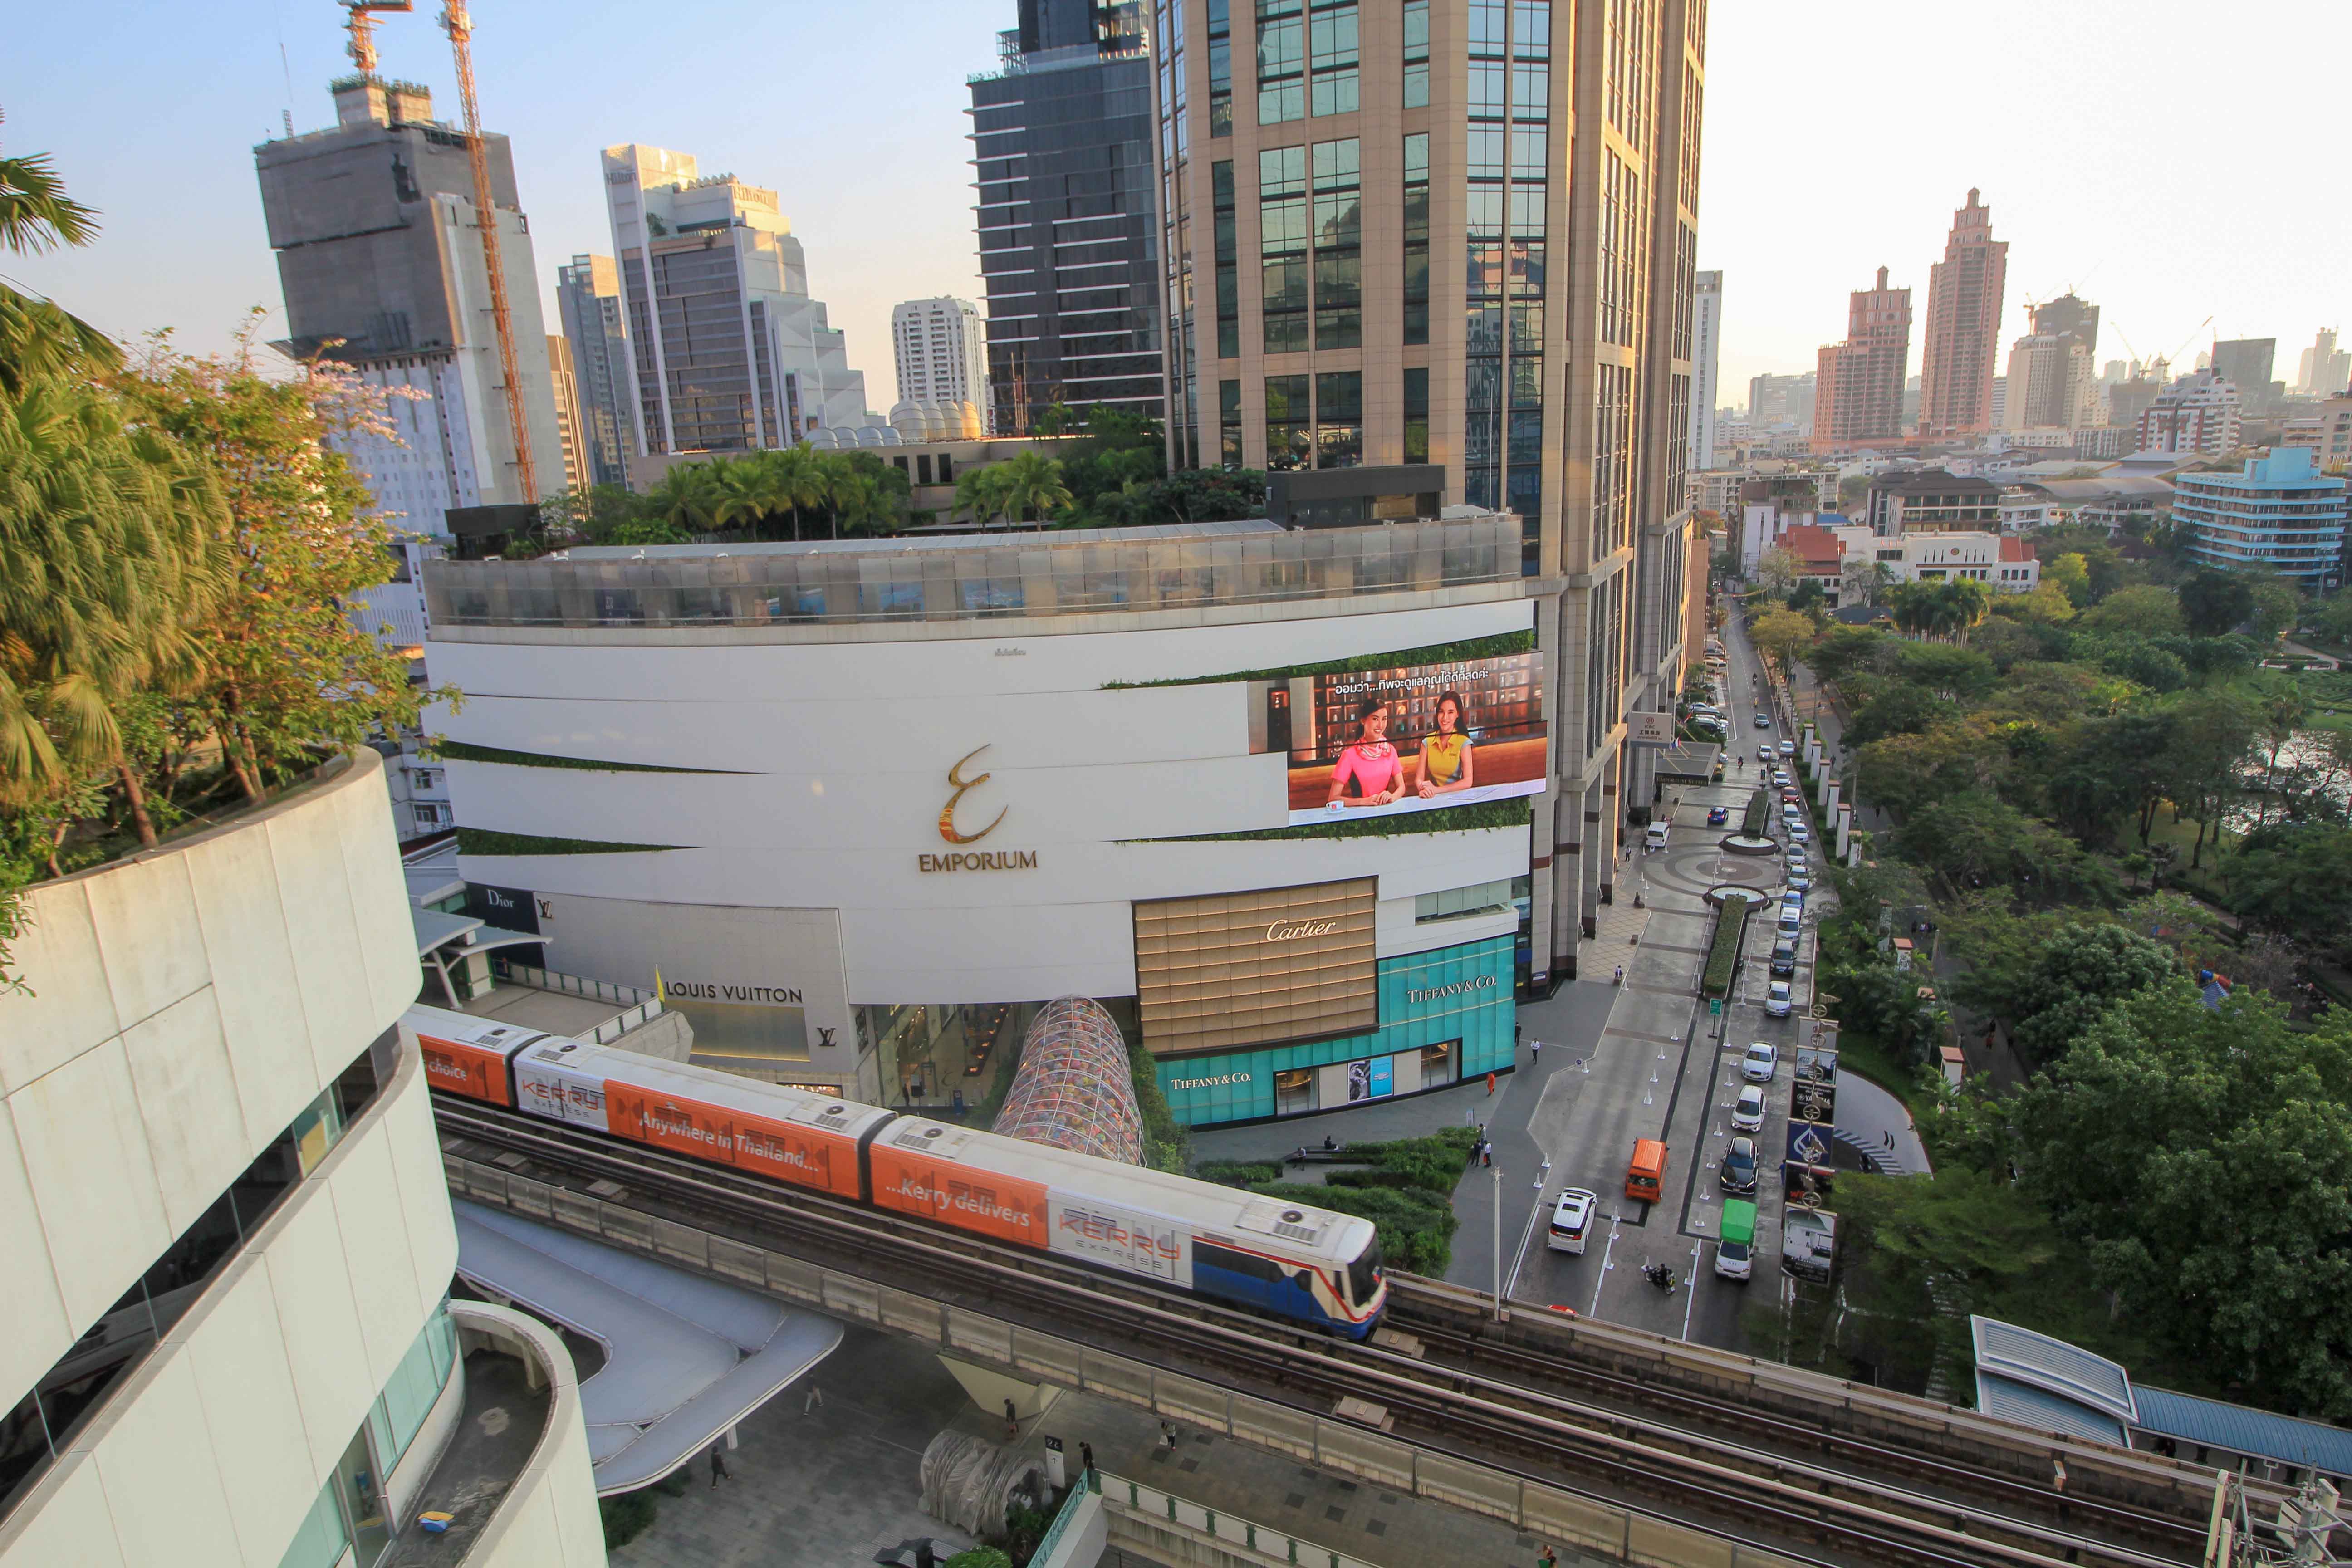 Emporium is one of the best places to shop in Bangkok